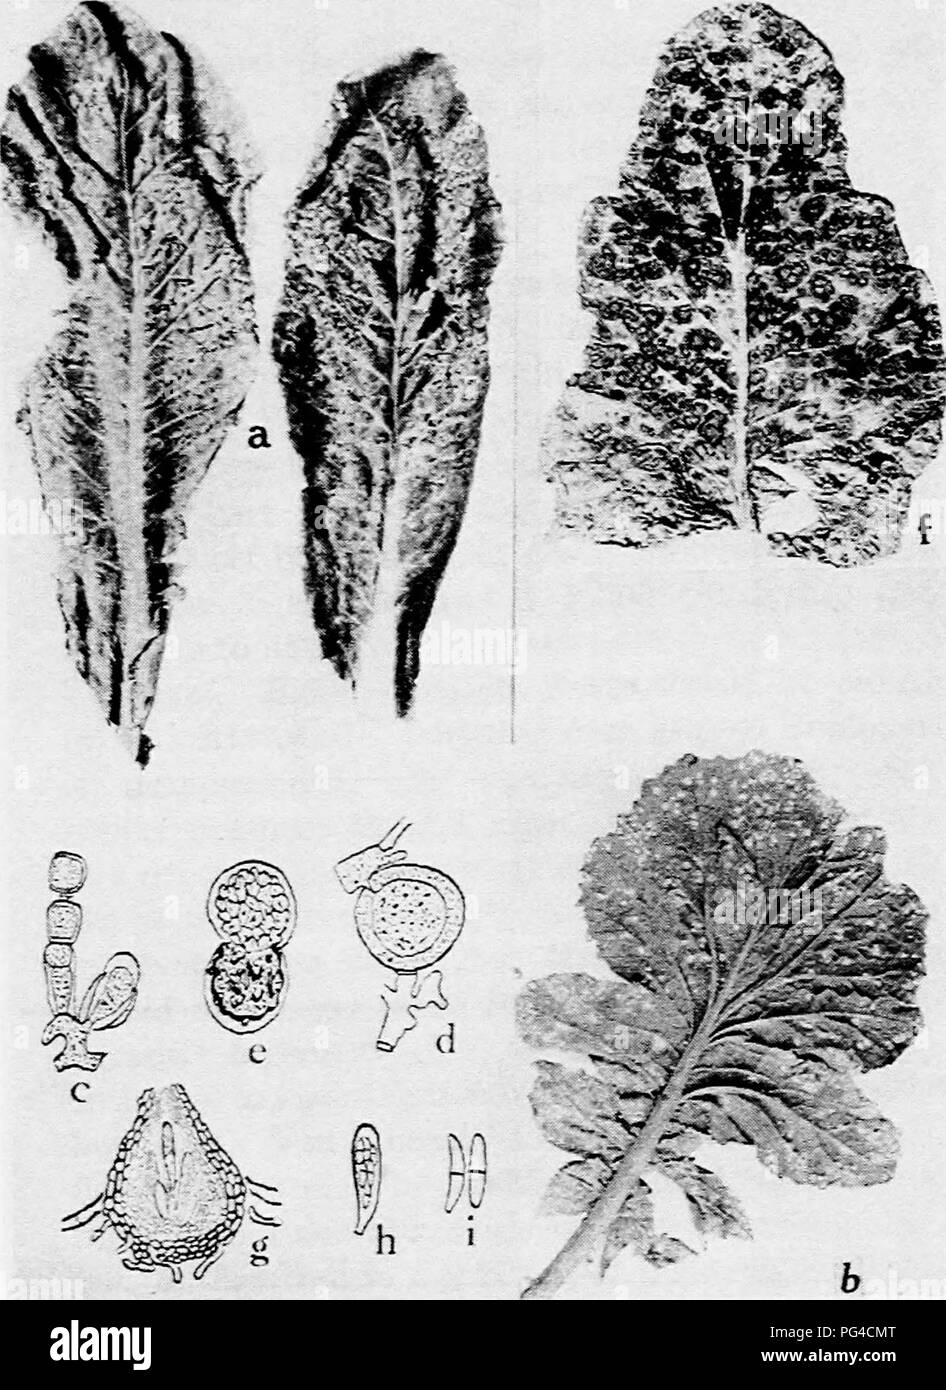 . Diseases of truck crops and their control . Vegetables. Fig. 33. Diseases of the Cauliflower and Radish. a. spot disease of cauliflower (after McCulloch), 6, white rust of radish, c. conidio- phore of the white rust fungus, Cystopus candidus, &lt;i. fertilization in Albugo Candida, e. germination of the oospore of Albugo Candida, f. ring spot on cauliflower head, g. perithecium of Mycosphmrella brassicicola, h. ascus of Mycospk&lt;Erella brassicicola, i. ascospores of MycosphtBreUa brassicicola (g. to i. after Osmun and Anderson).. Please note that these images are extracted from scanned pag Stock Photo